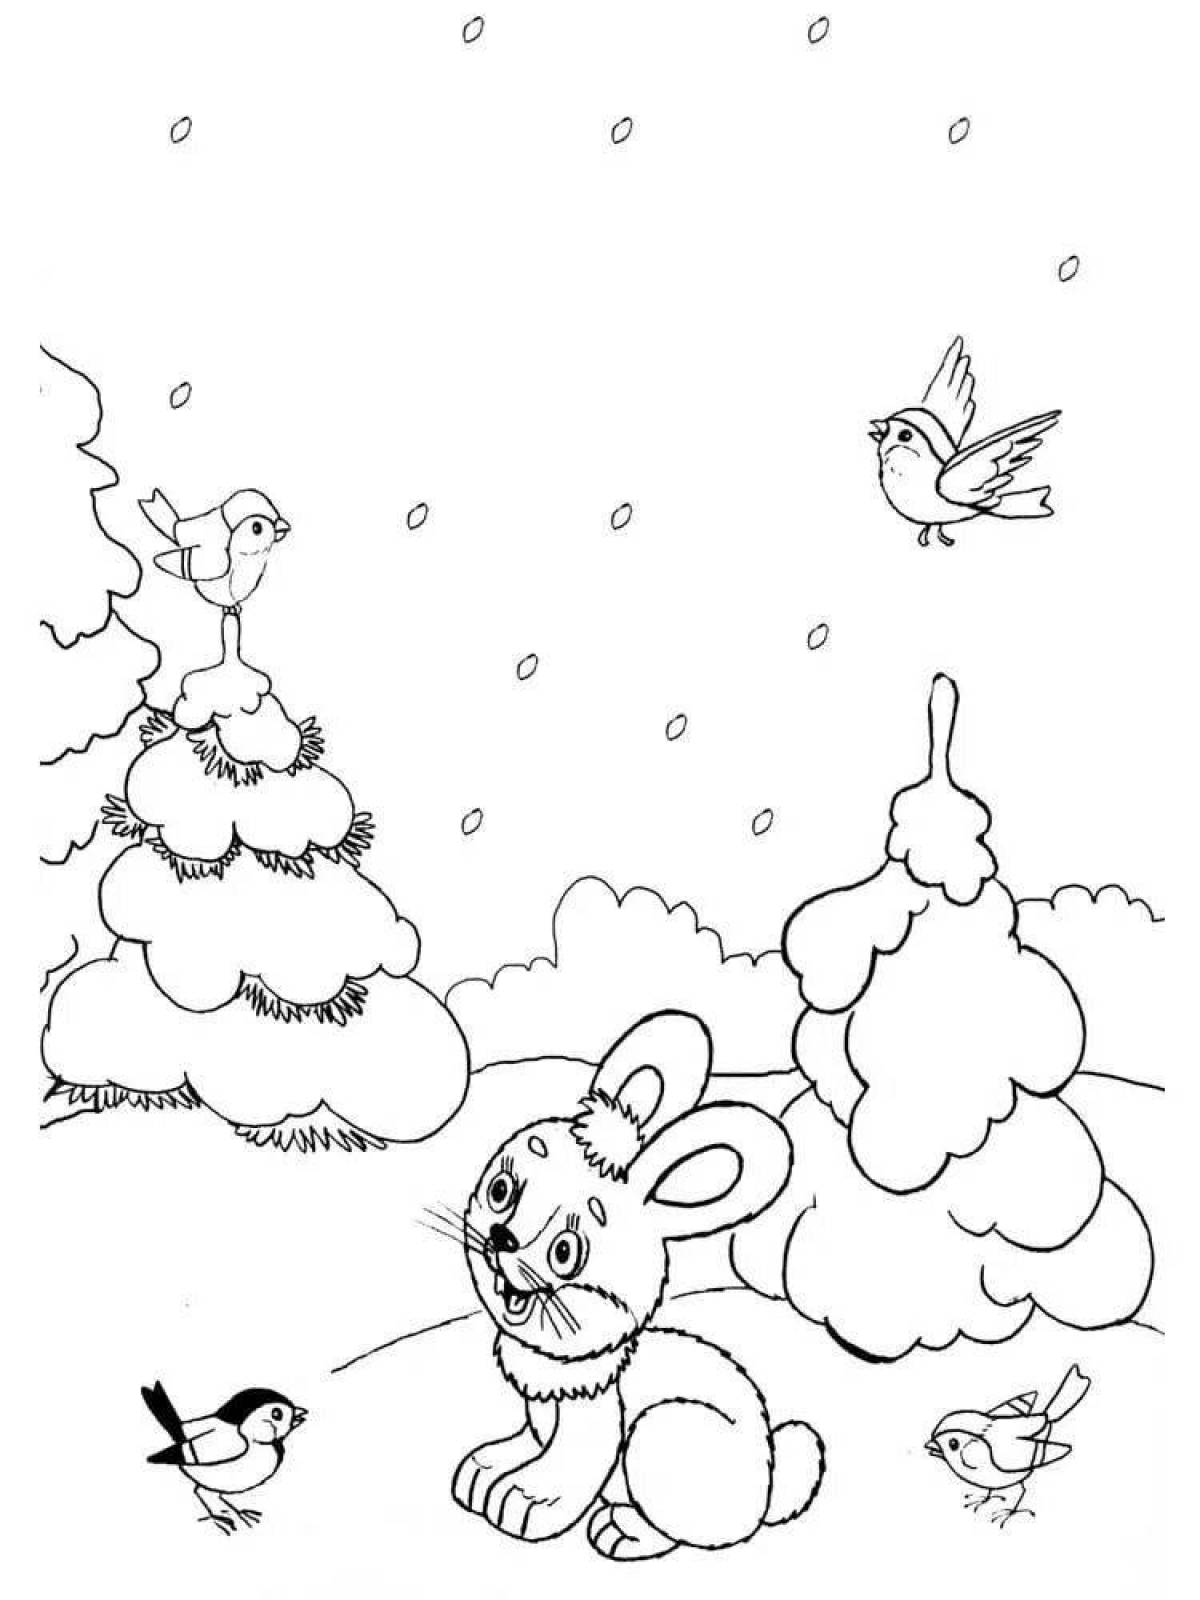 Coloring book glowing Christmas tree and rabbit